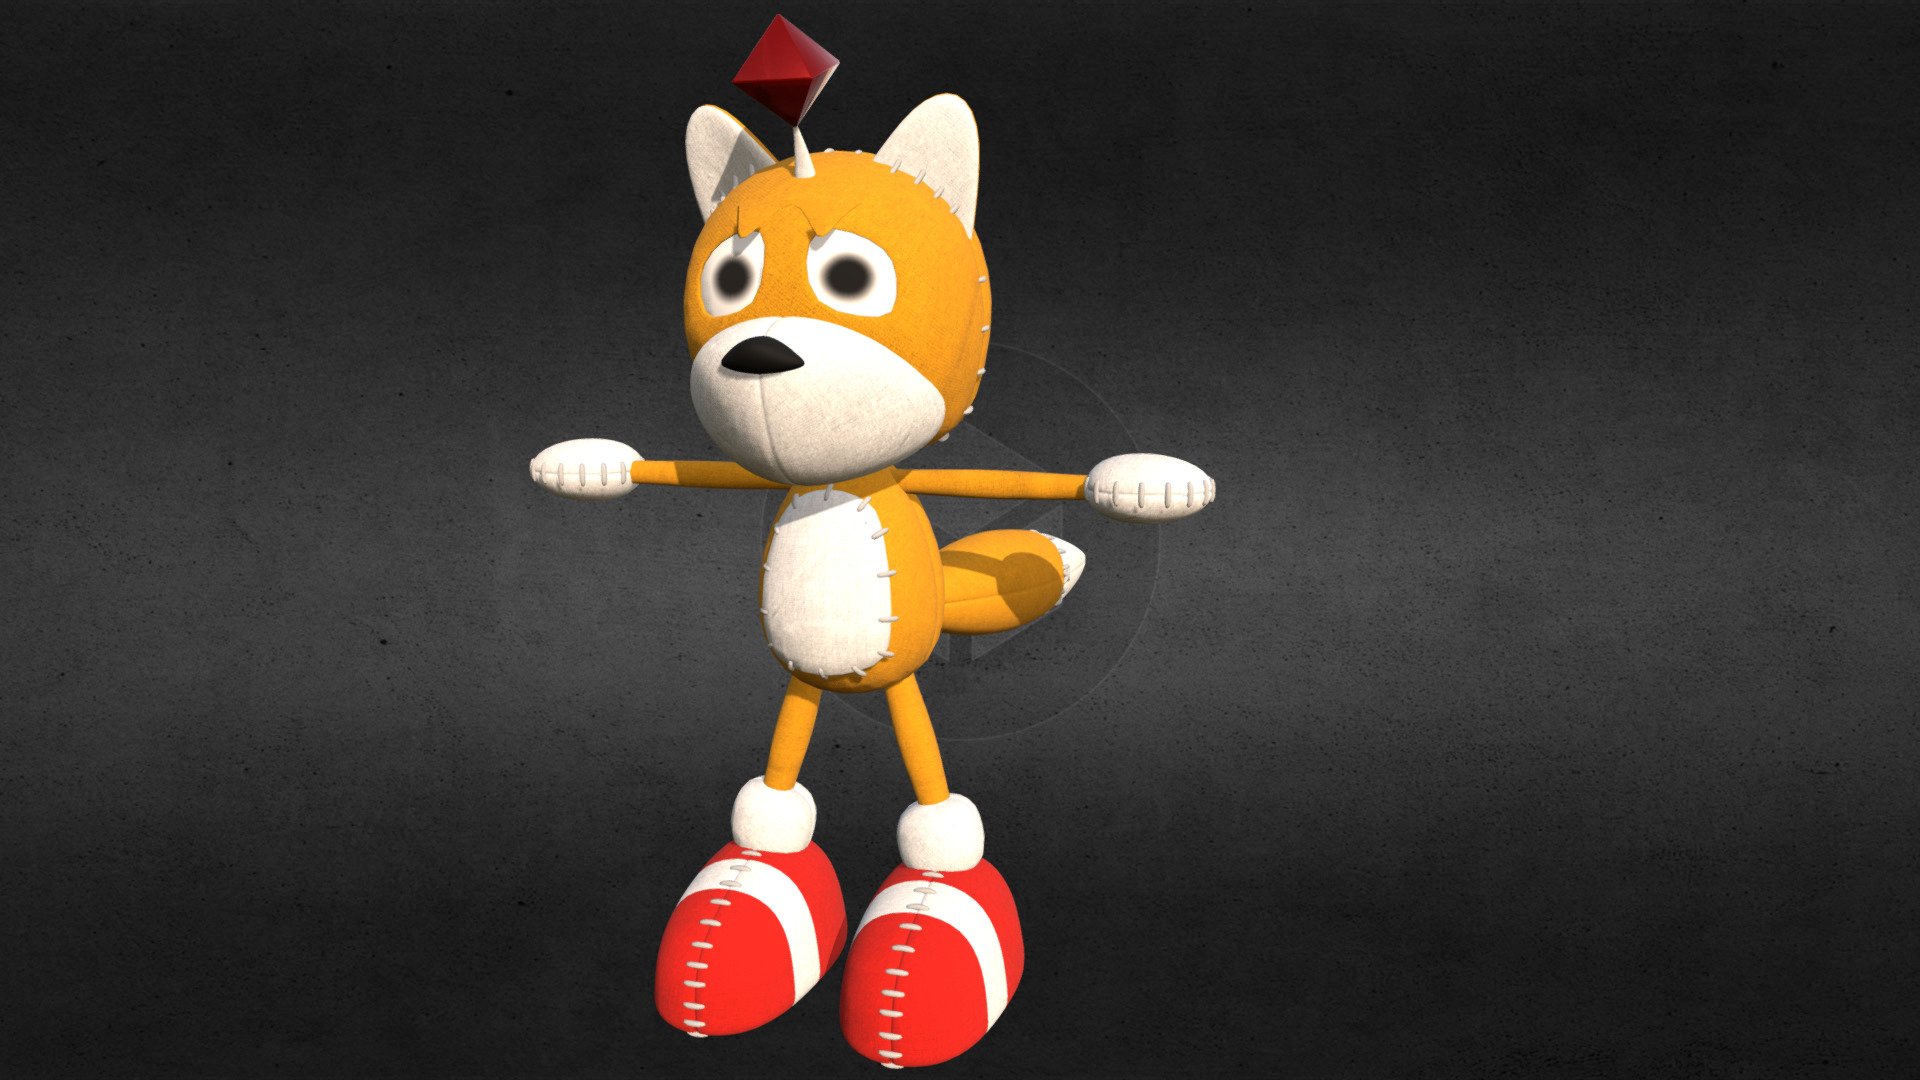 SORRY AGAIN!! Here's Tails Doll!